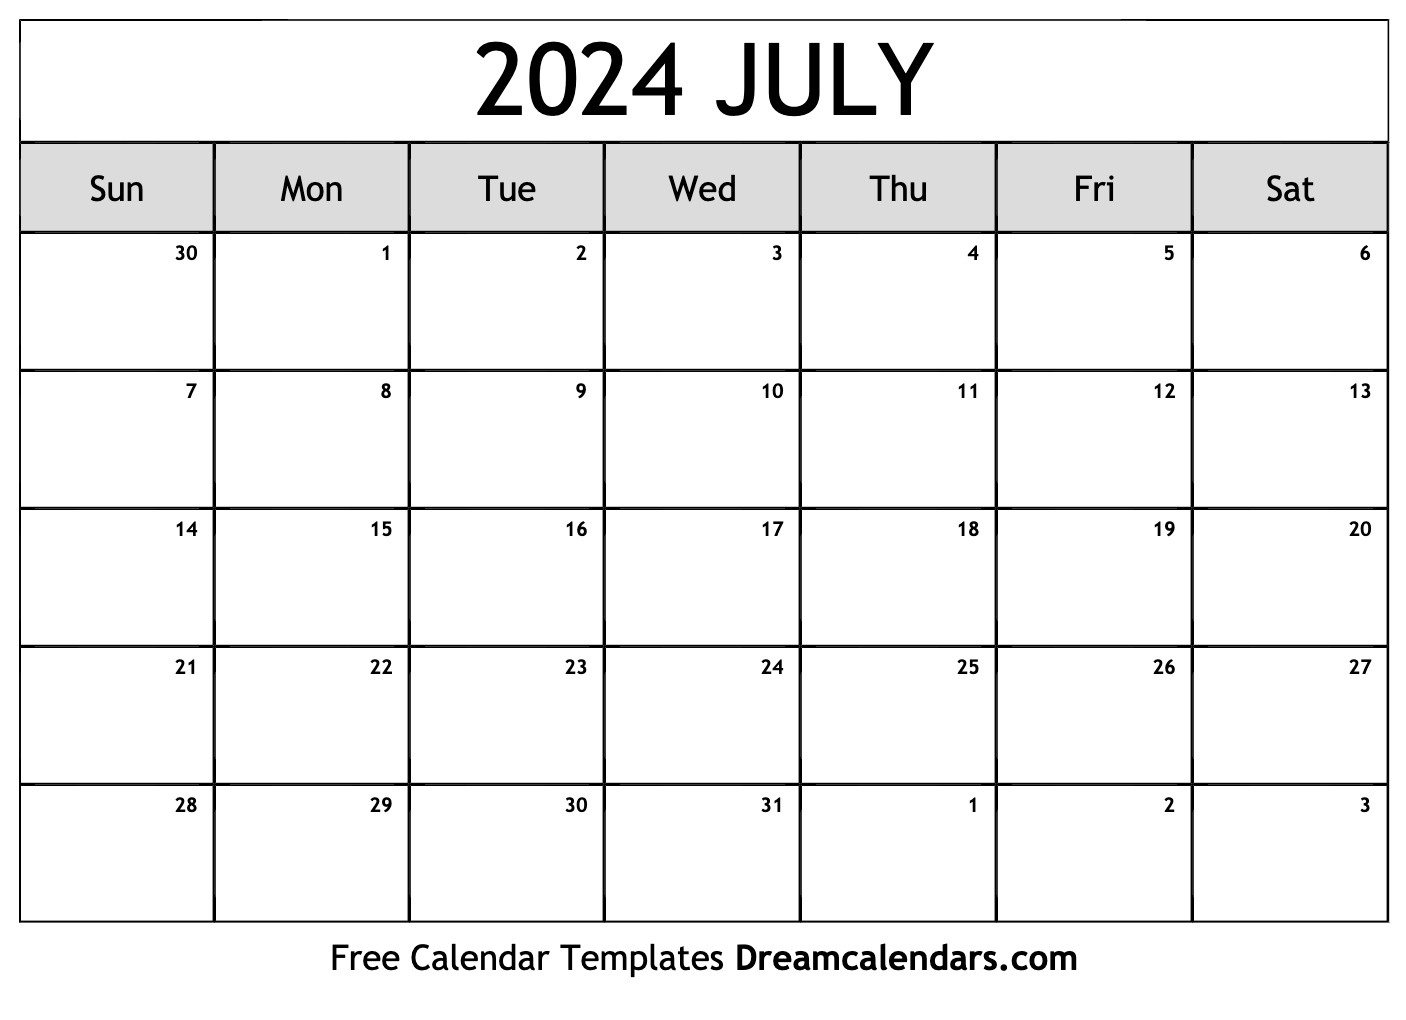 July 2024 Calendar - Free Printable With Holidays And Observances for July 16 2024 Calendar